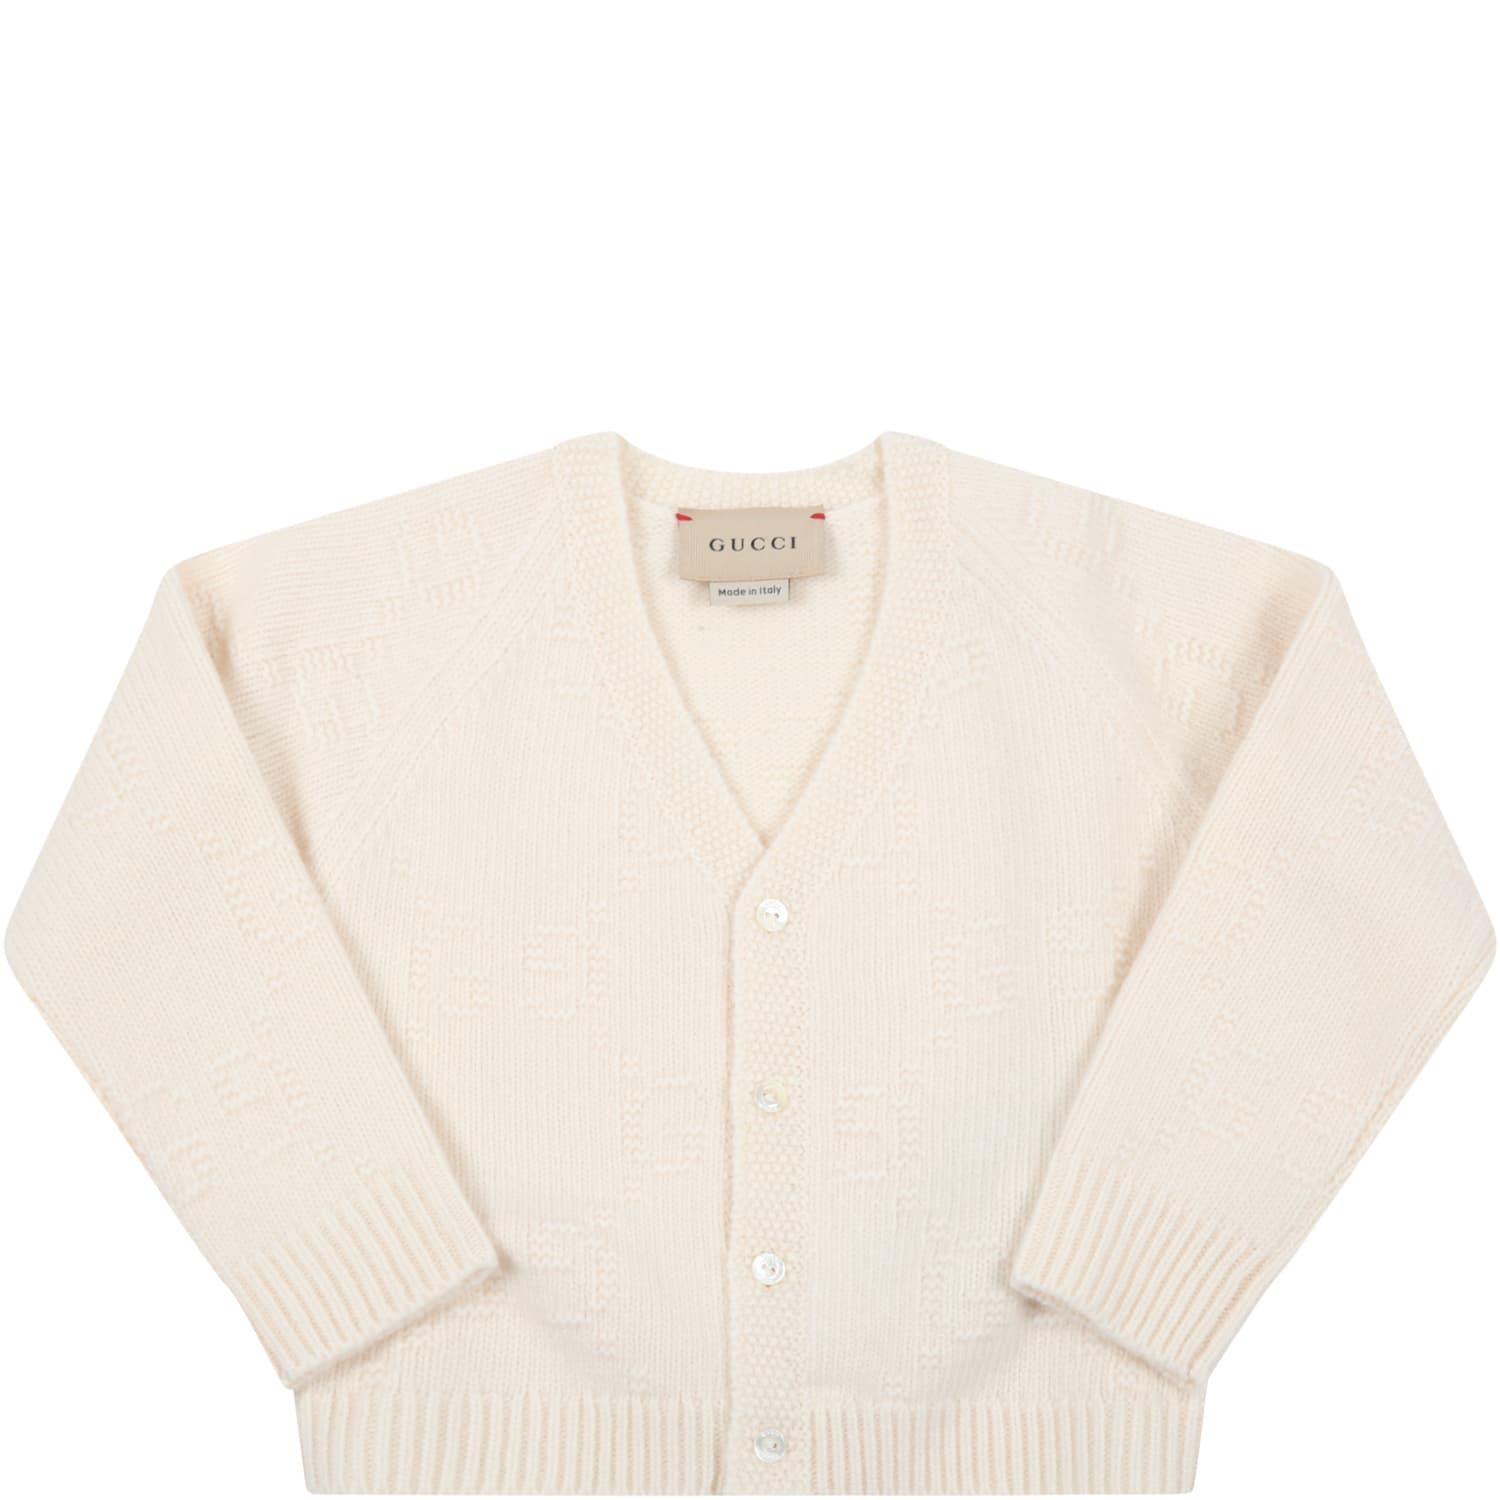 Gucci White Cardigan For Baby With Gg Motif